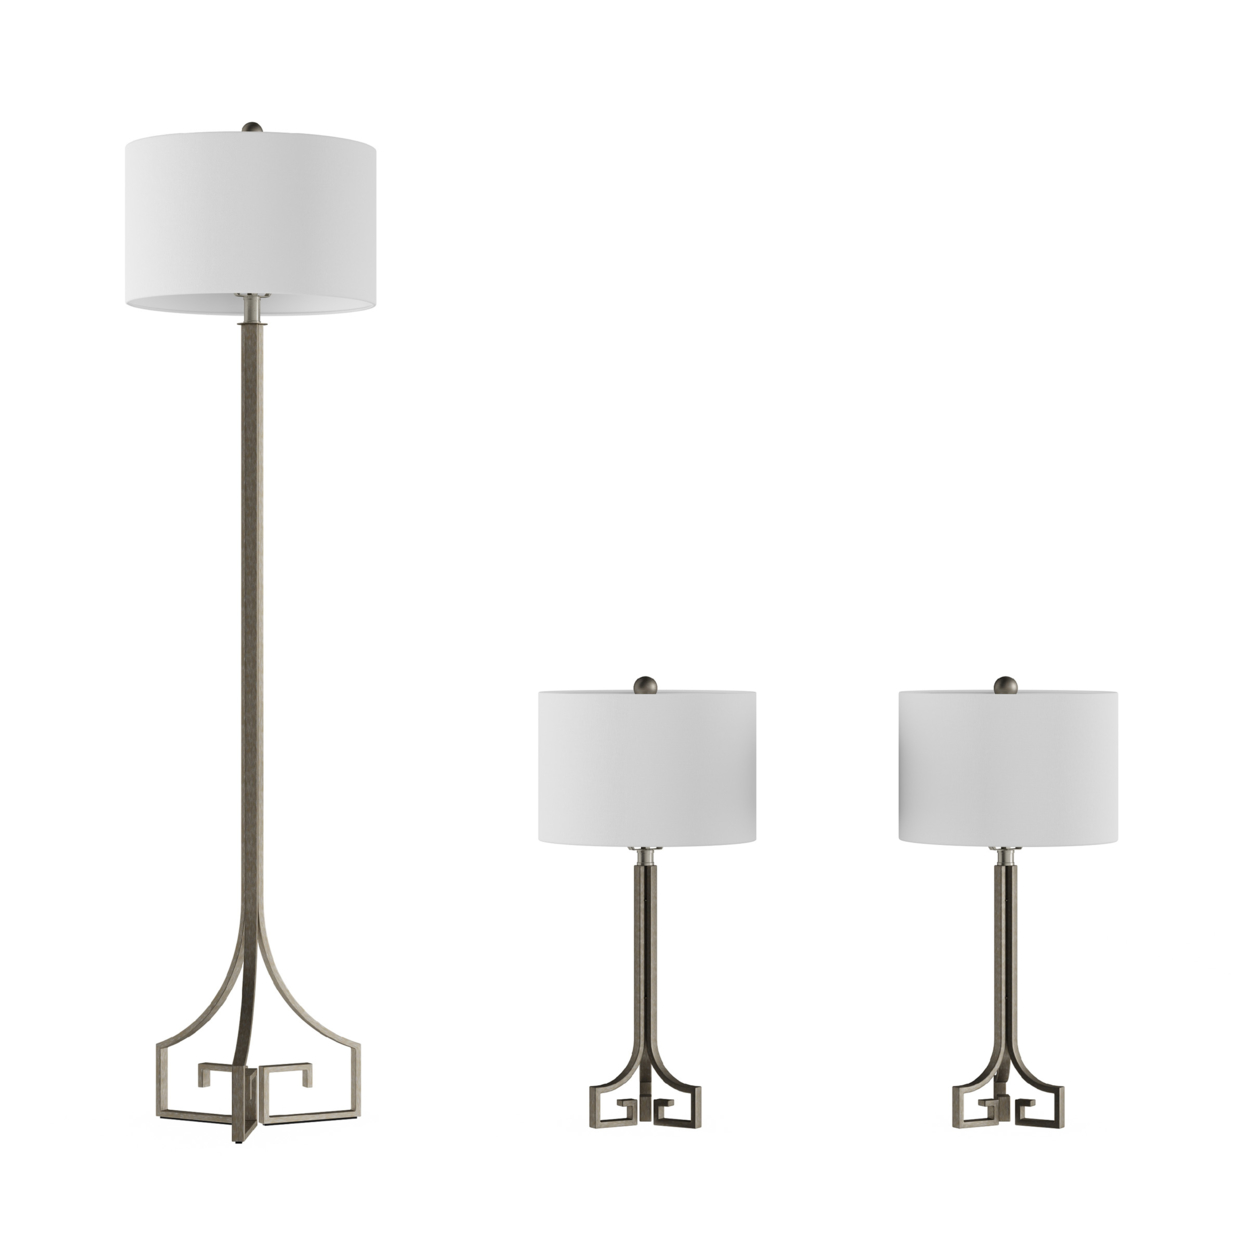 Greek Key Table And Floor Lamps-Set Of 3 Modern Lights With LED Bulbs-Antique Silver With Ivory Shades